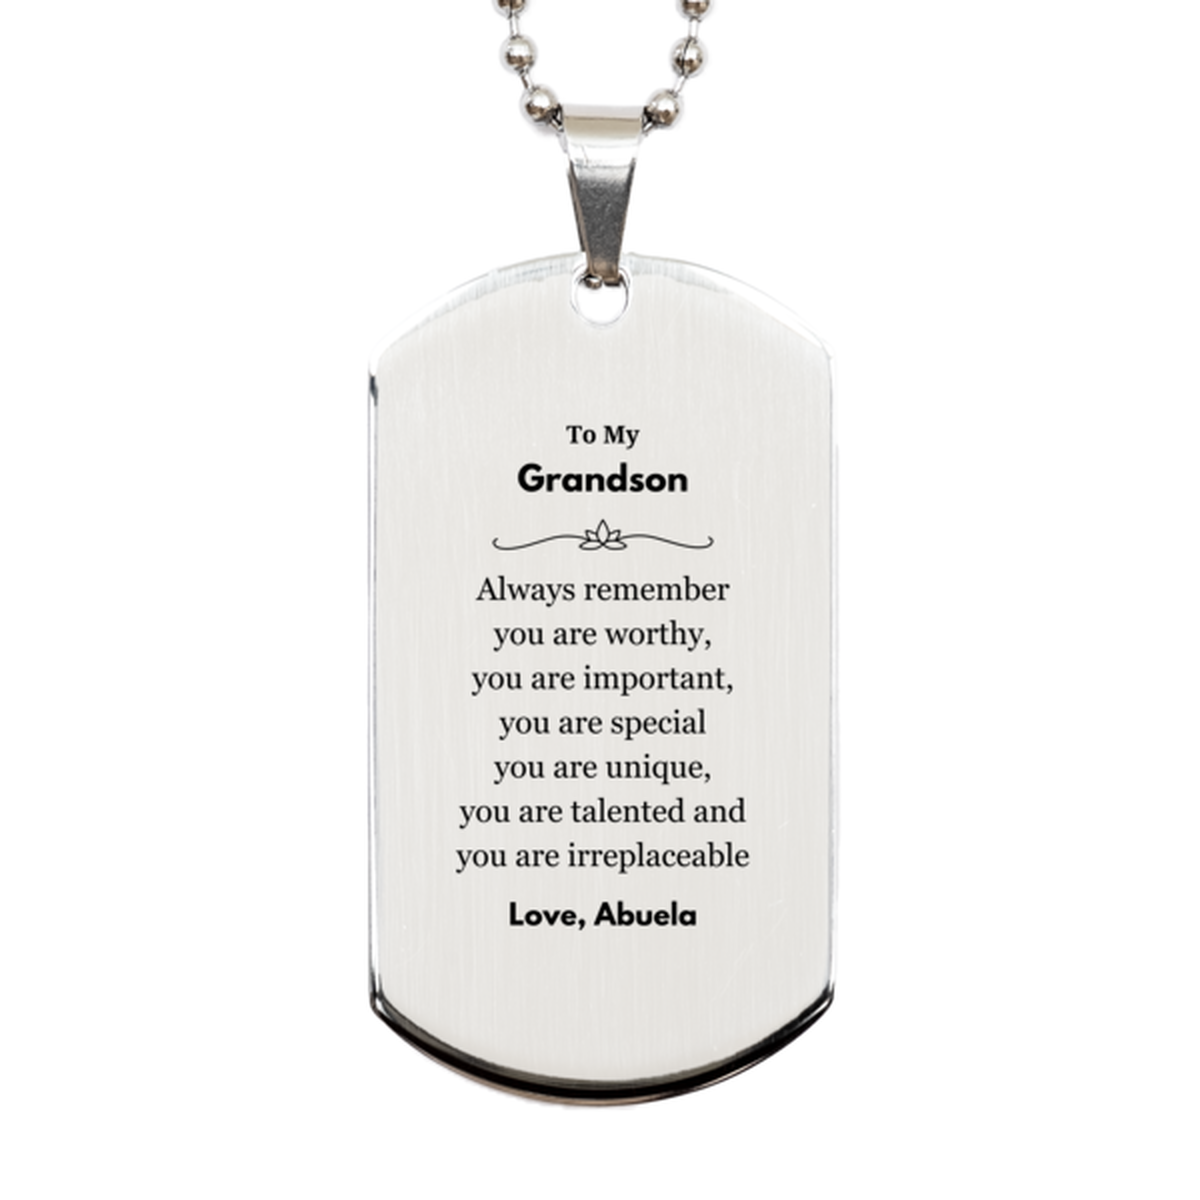 Grandson Birthday Gifts from Abuela, Inspirational Silver Dog Tag for Grandson Christmas Graduation Gifts for Grandson Always remember you are worthy, you are important. Love, Abuela